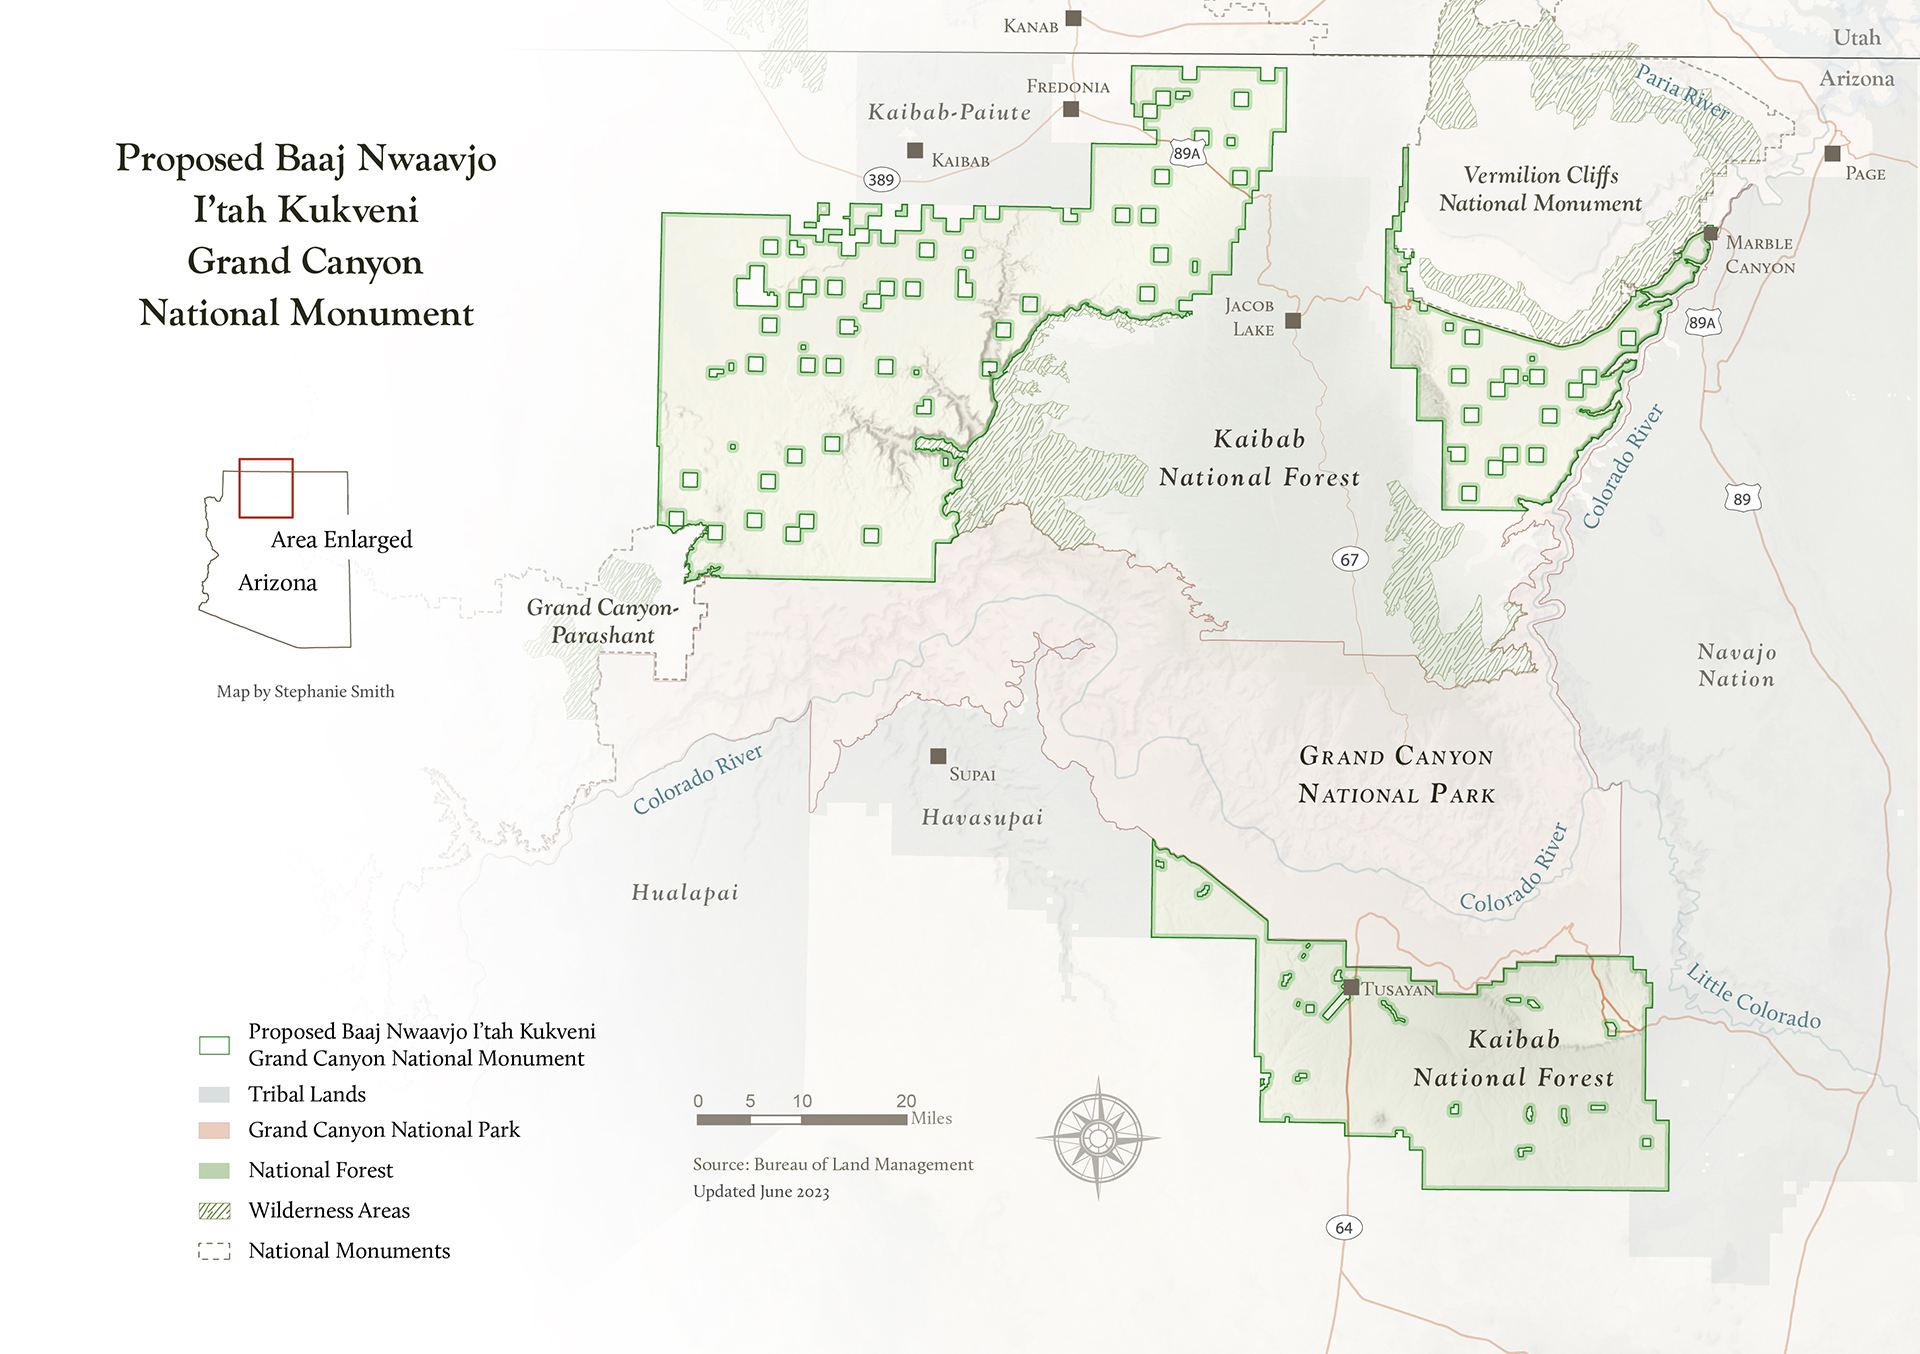 View the proposed national monument map